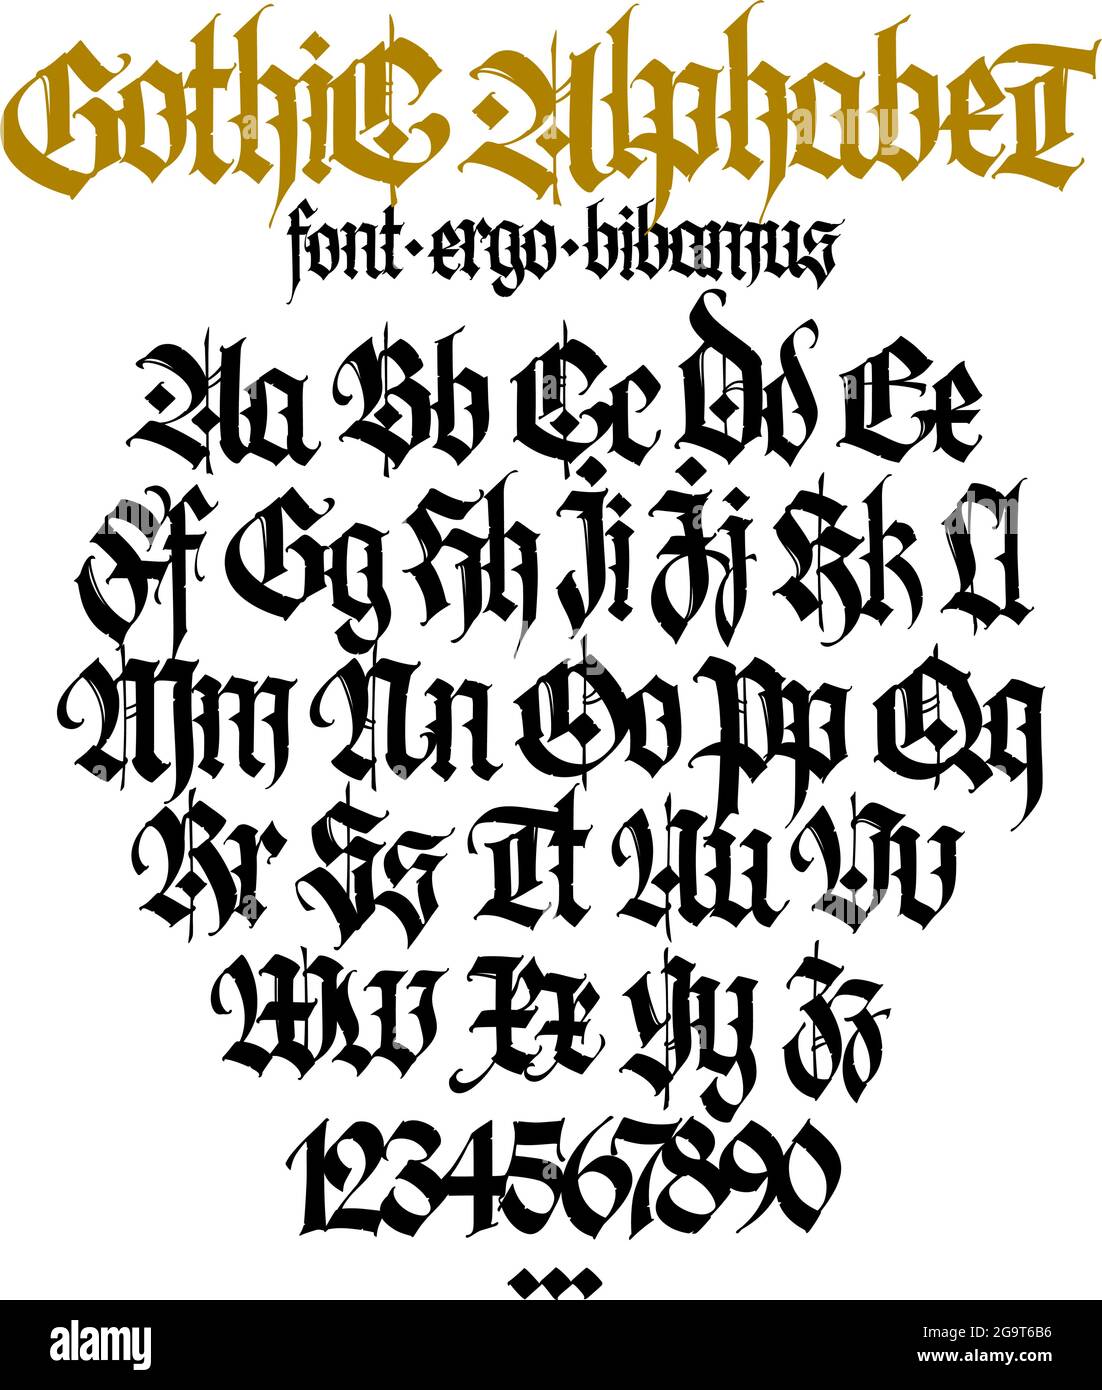 Gothic Calligraphy Images Browse 16130 Stock Photos  Vectors Free  Download with Trial  Shutterstock